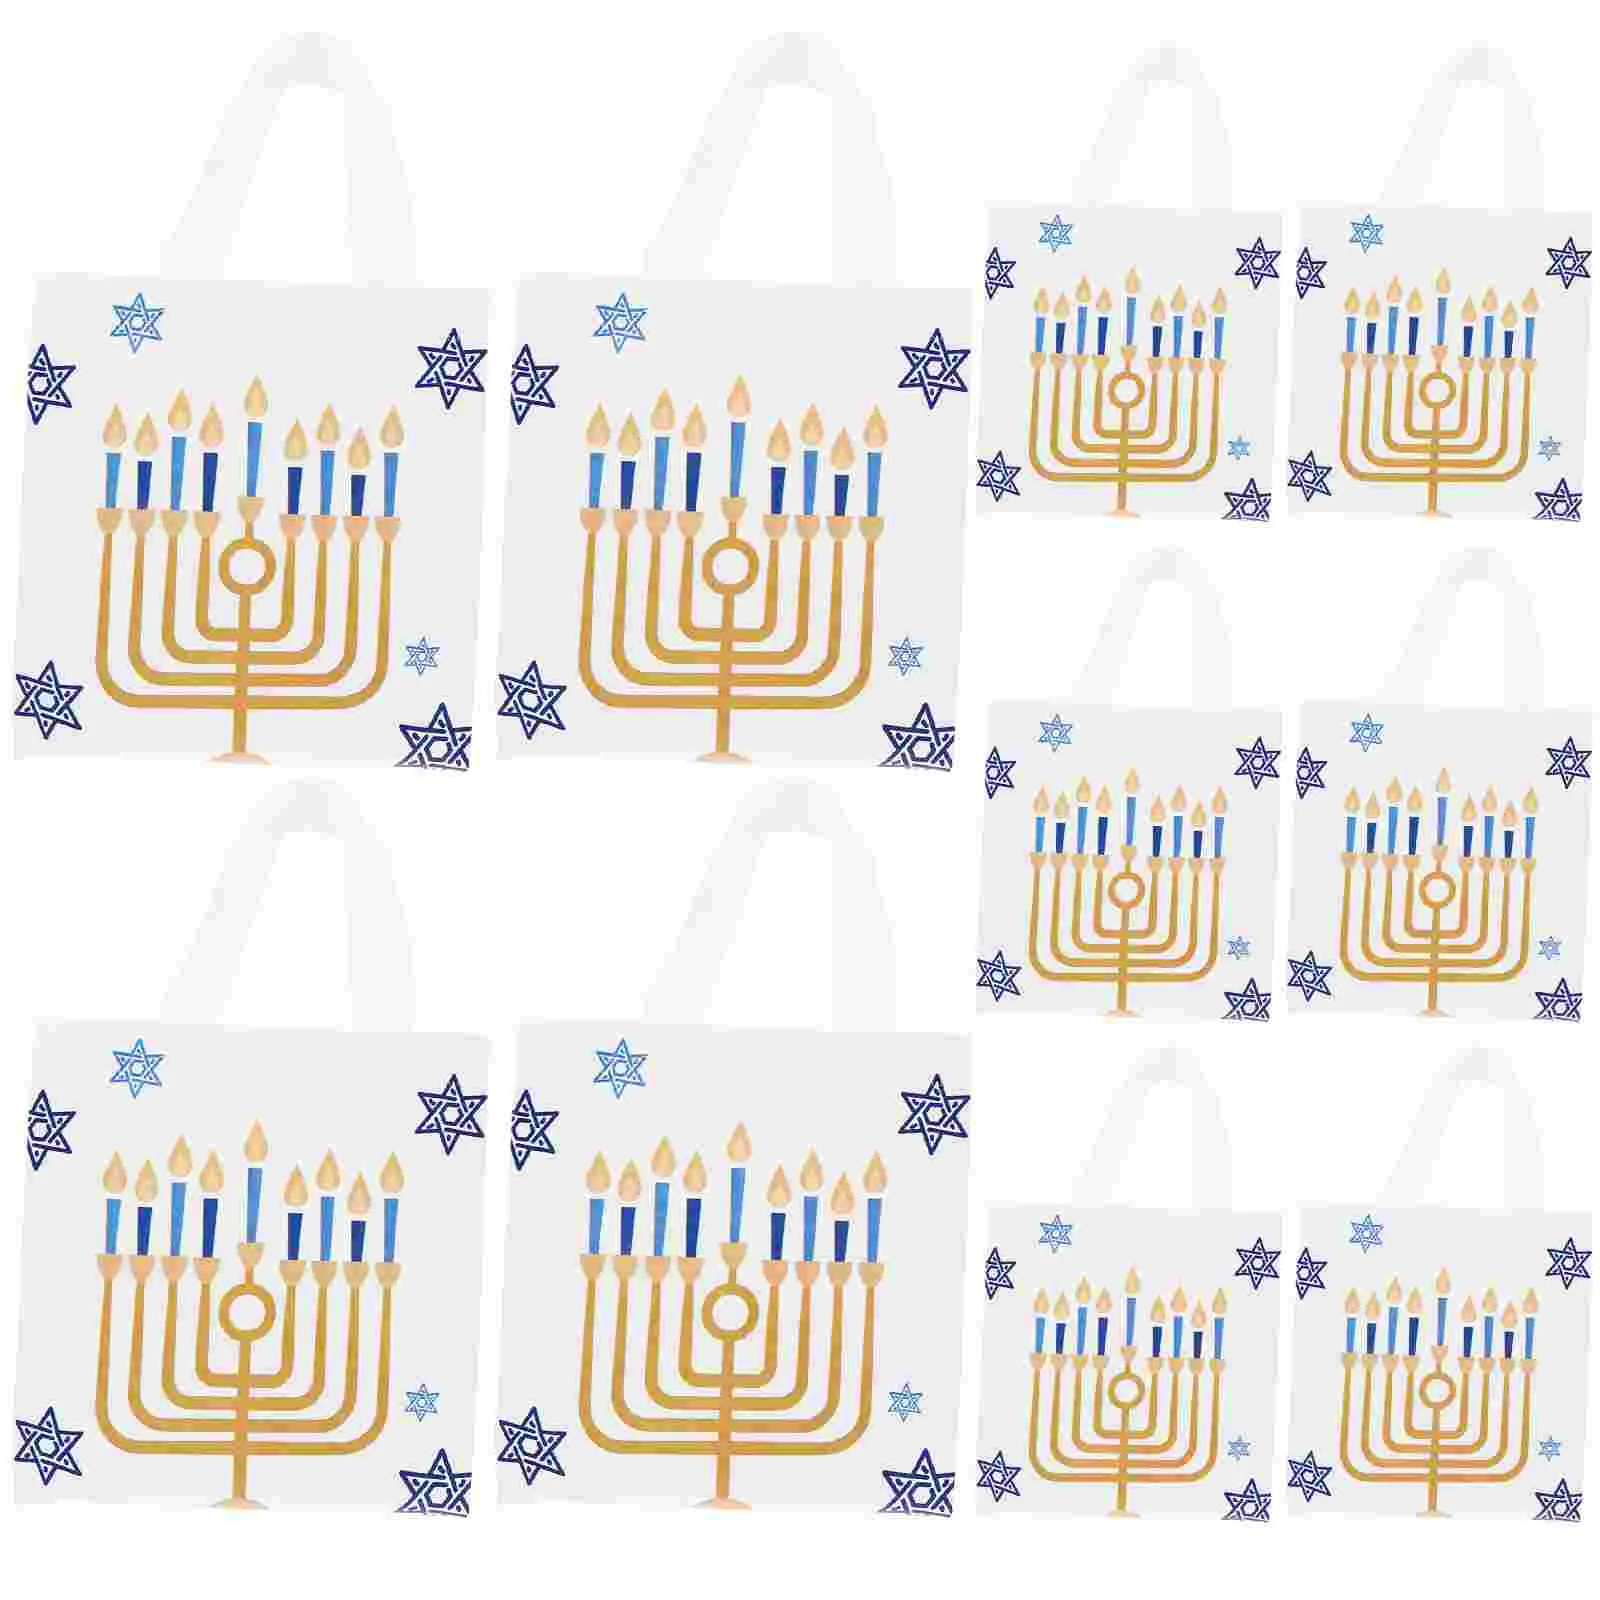 

10 Pcs Favor Bags Wrapping Presents Candy Hanukkah Decors Holders Party Gift Portable Handheld